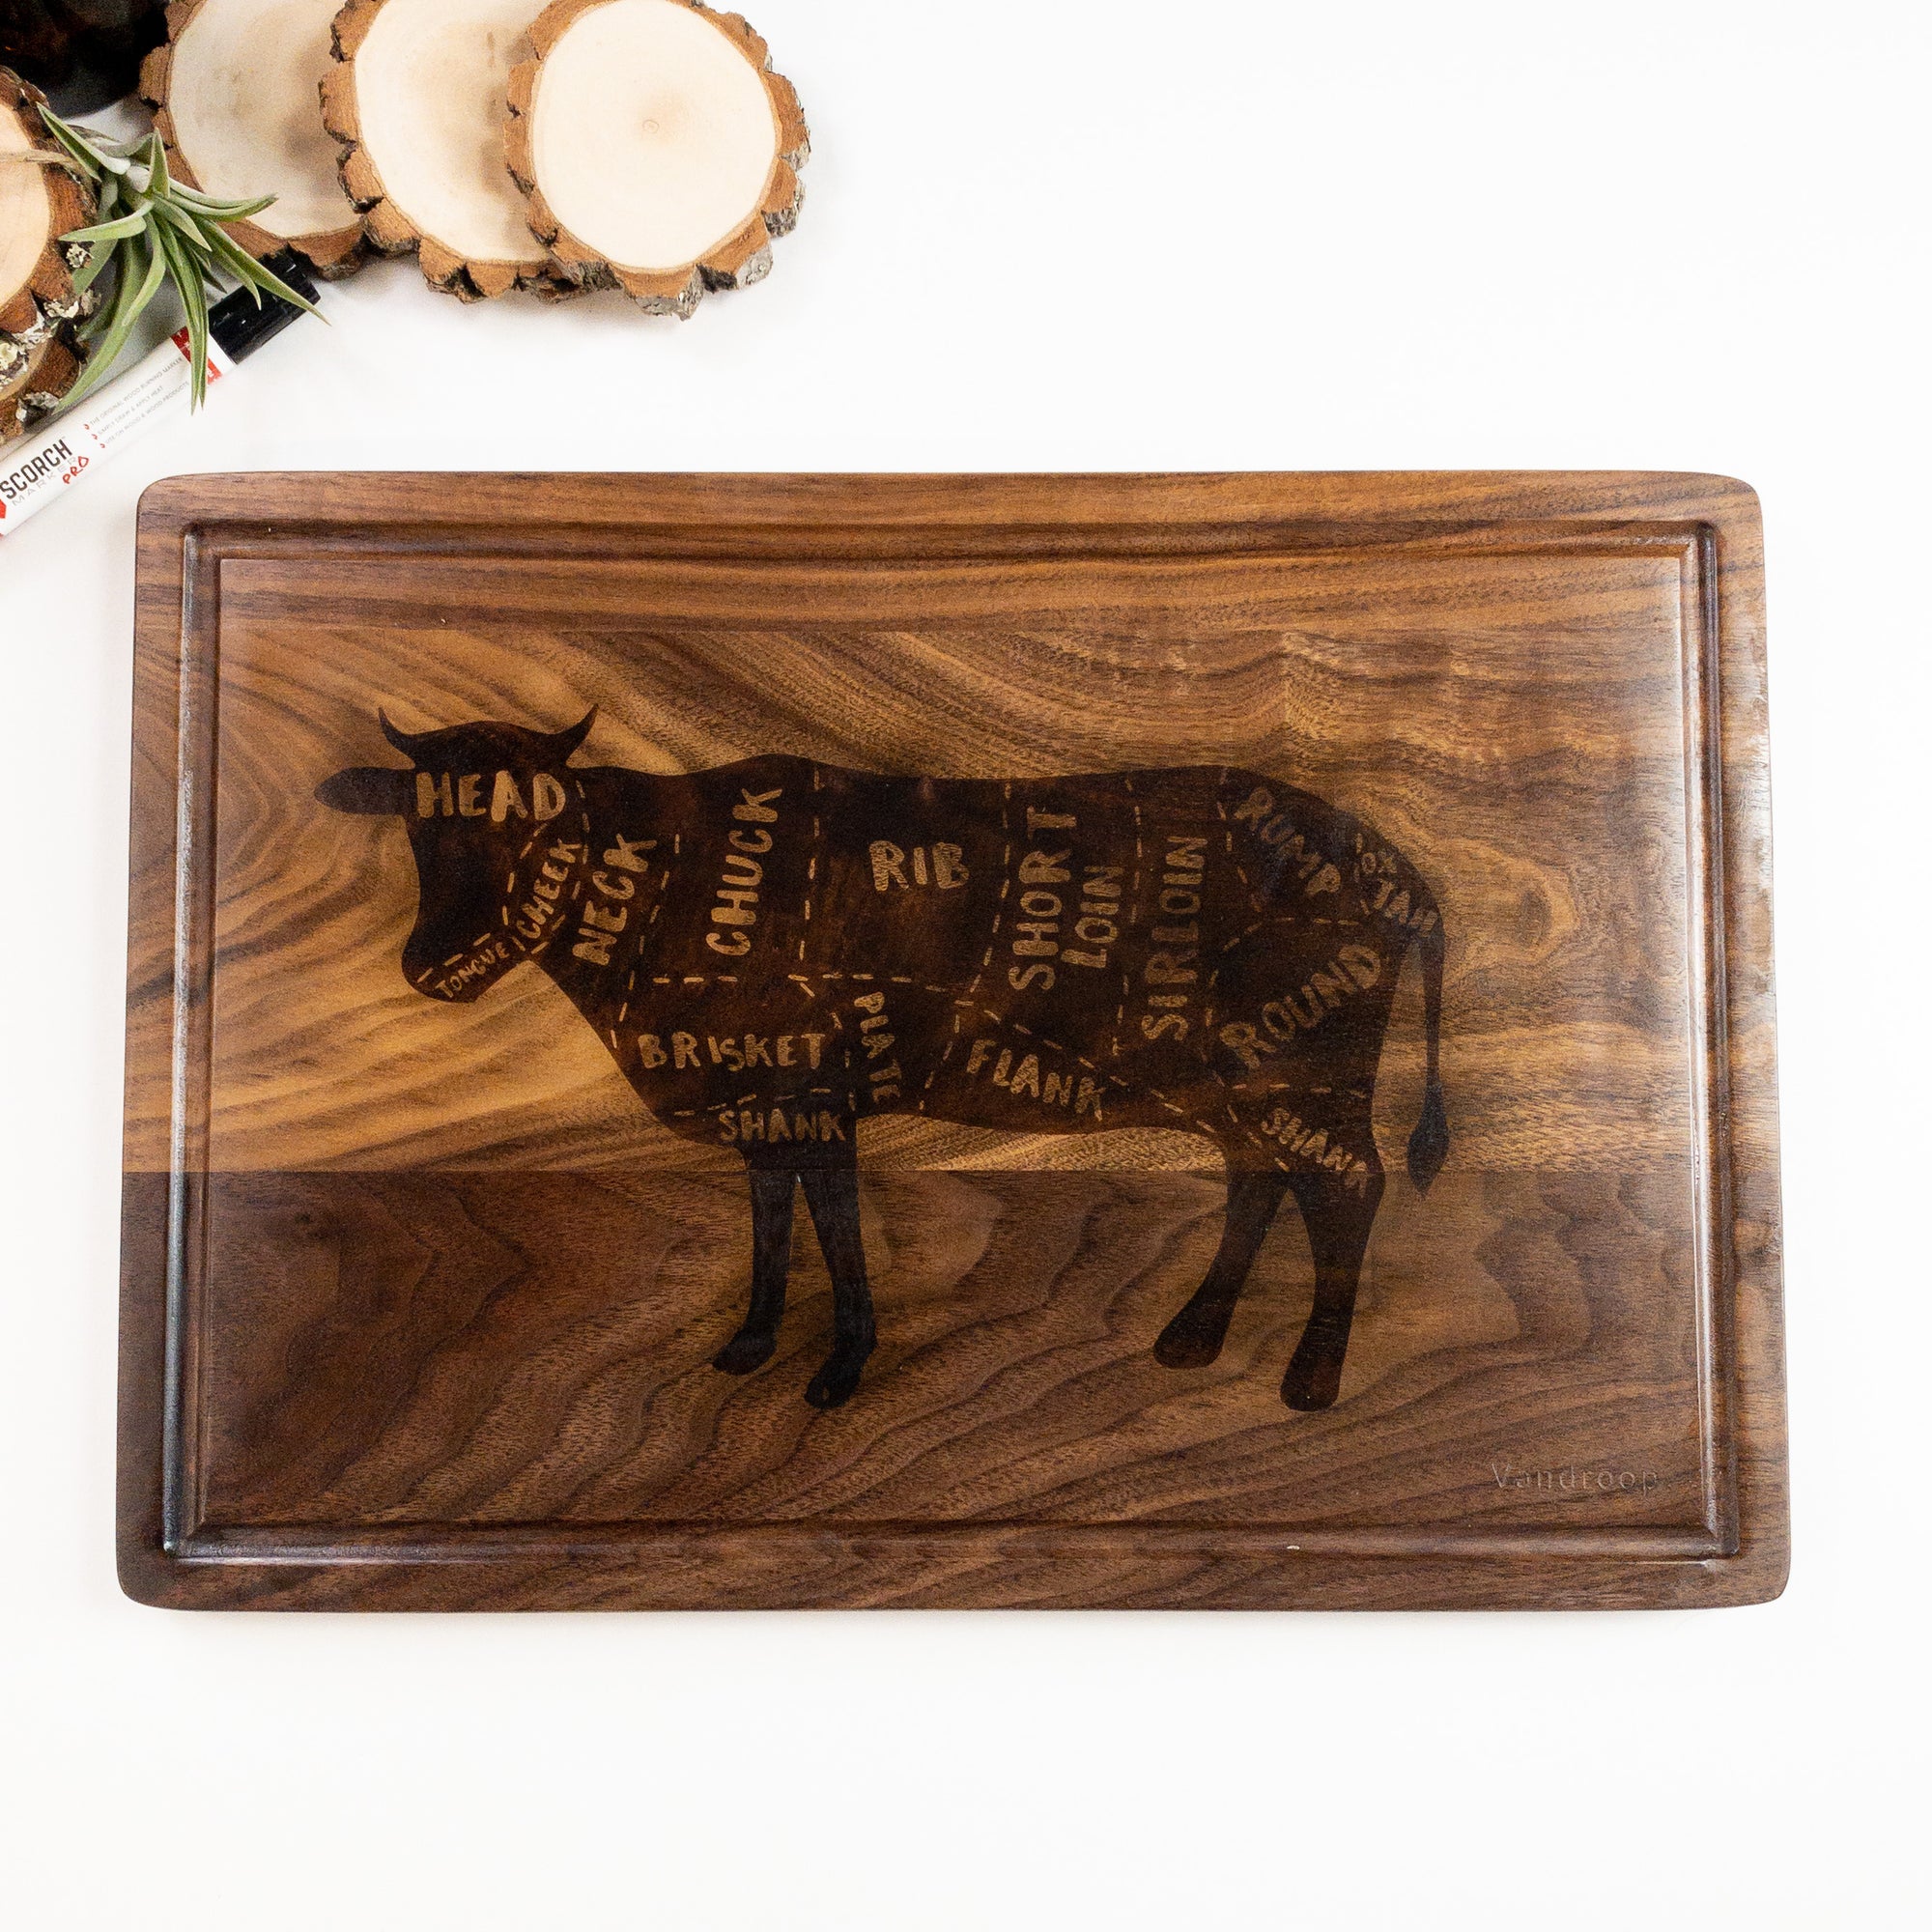 5 Cutting Board Designs You Can Burn with the Scorch Marker